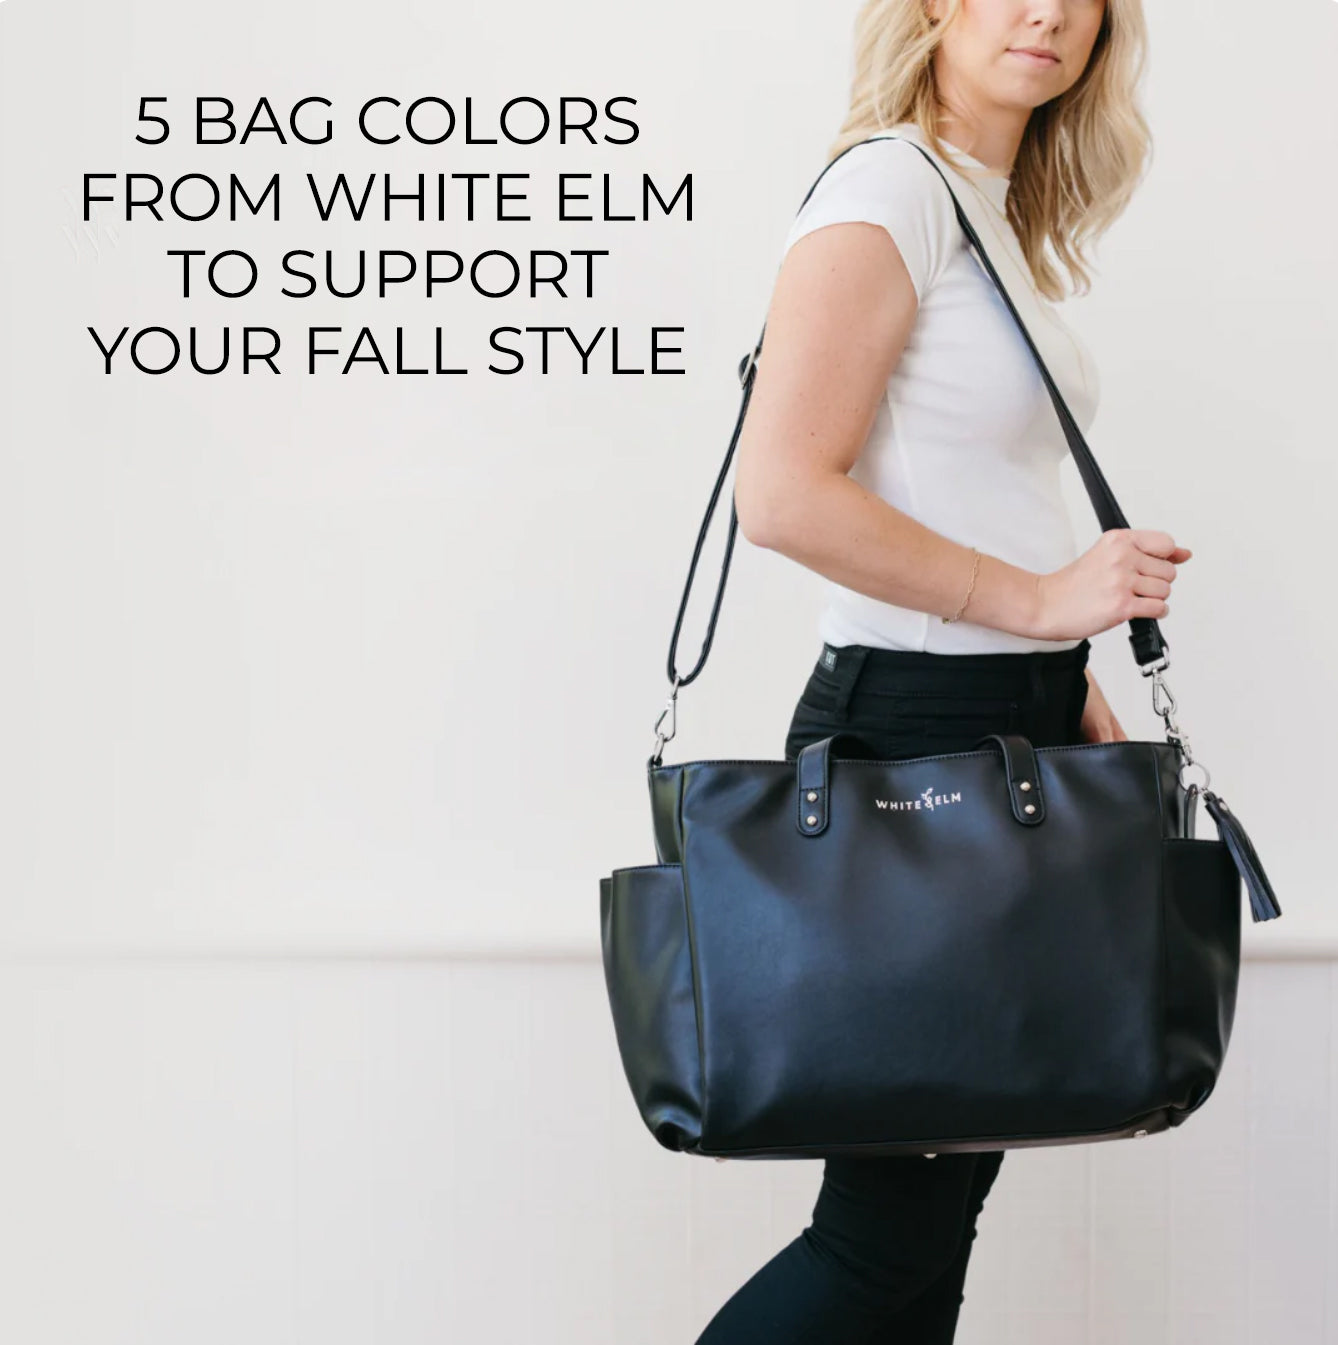 5 Bag Colors From White Elm to Support Your Fall Style